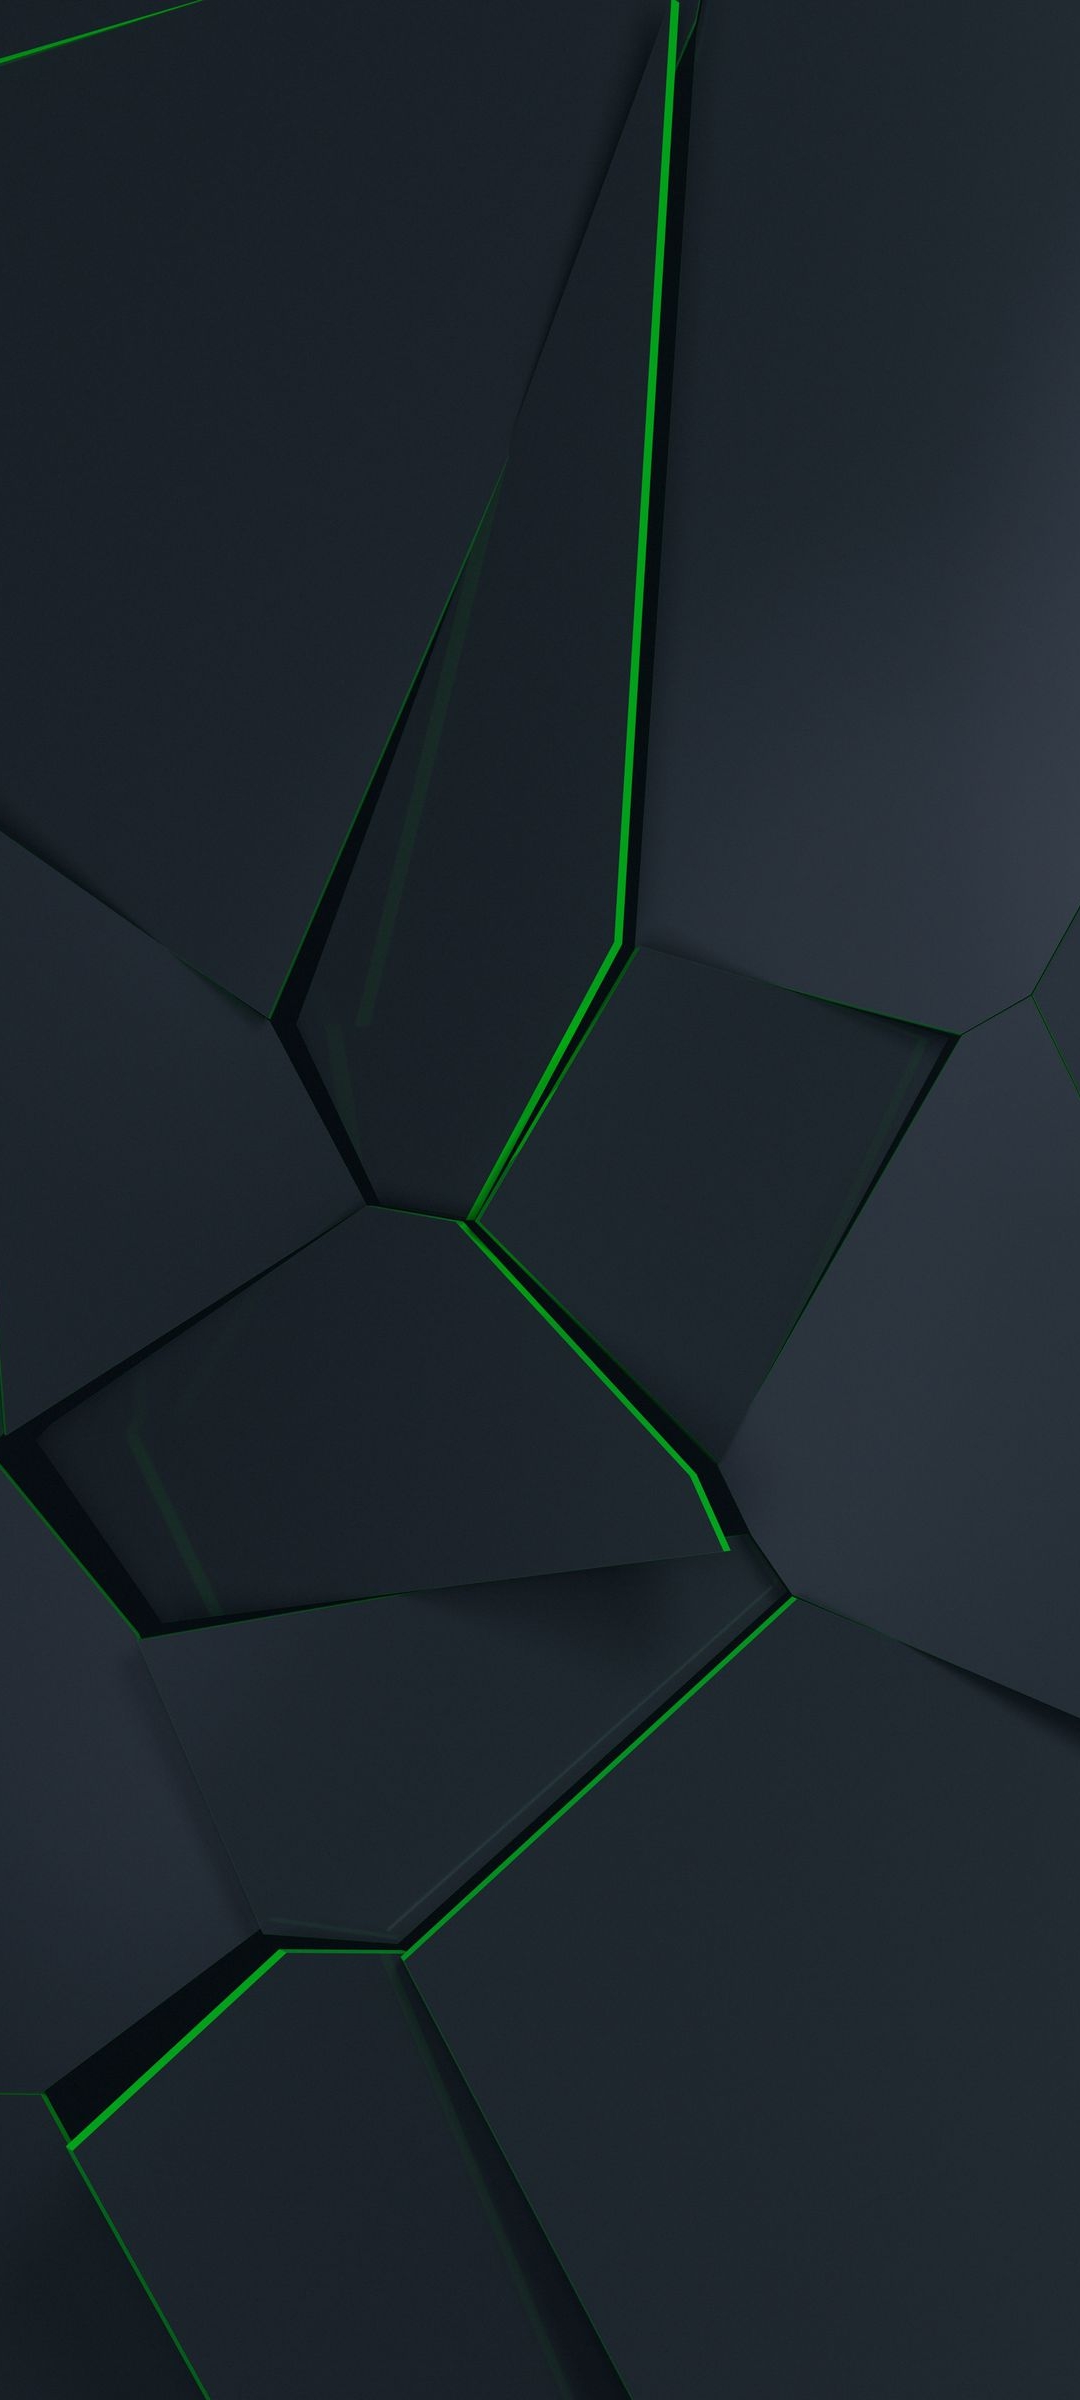 Xiaomi Black Shark 4 Wallpapers | Android wallpaper abstract, Iphone  wallpaper, Android wallpaper nature